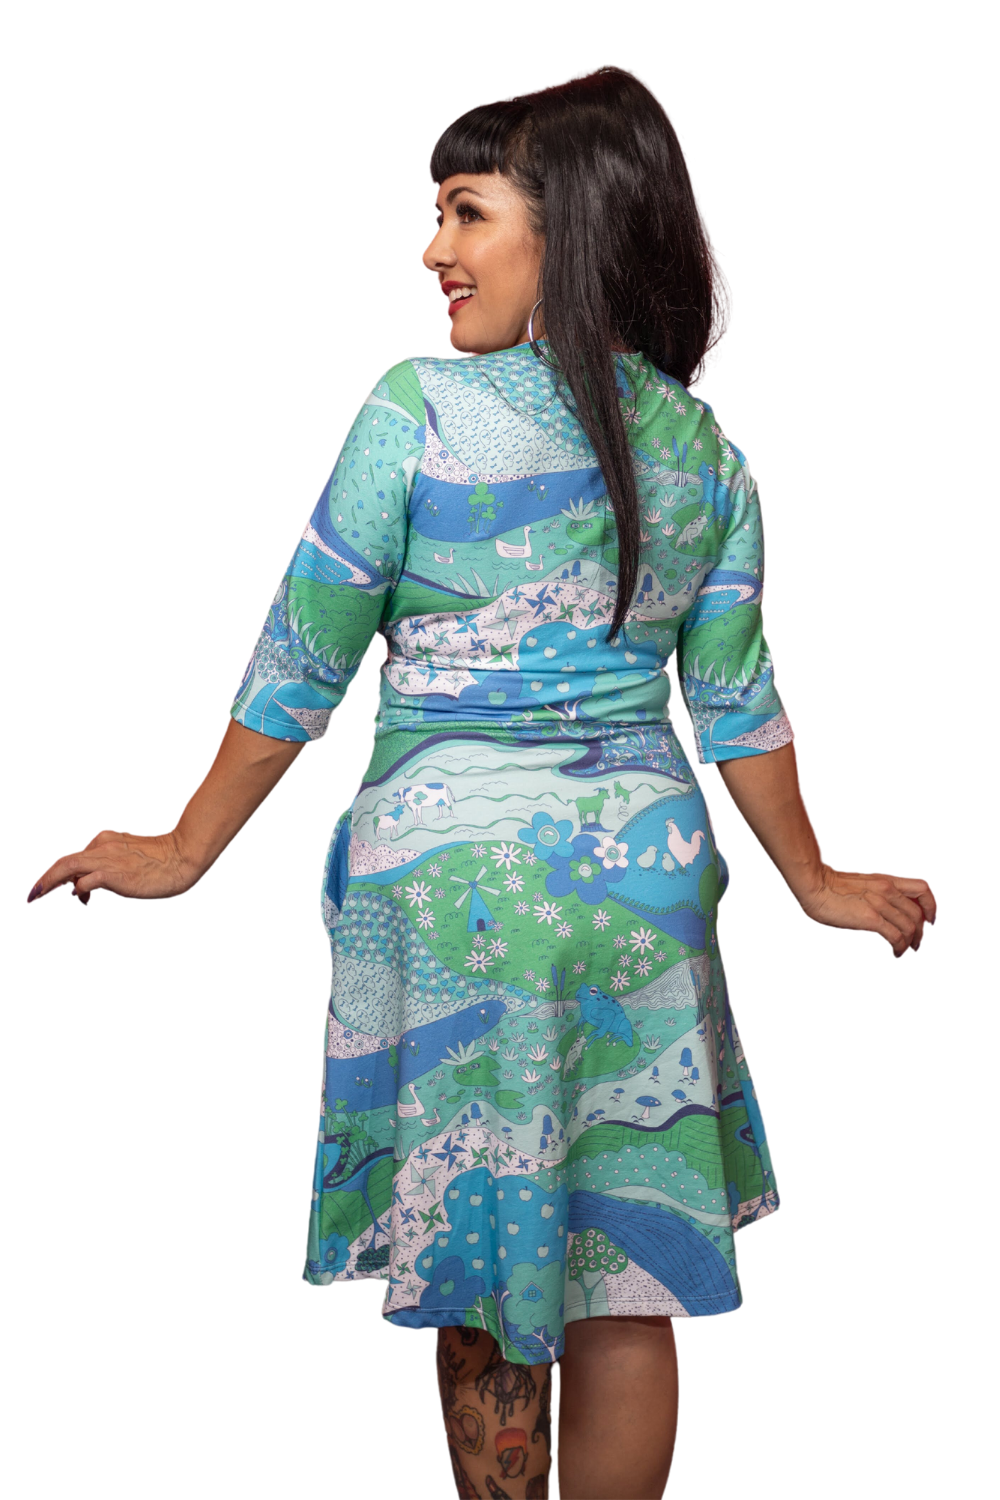 Back view of model in sweetheart wrap dress in psychedelic blue and green print